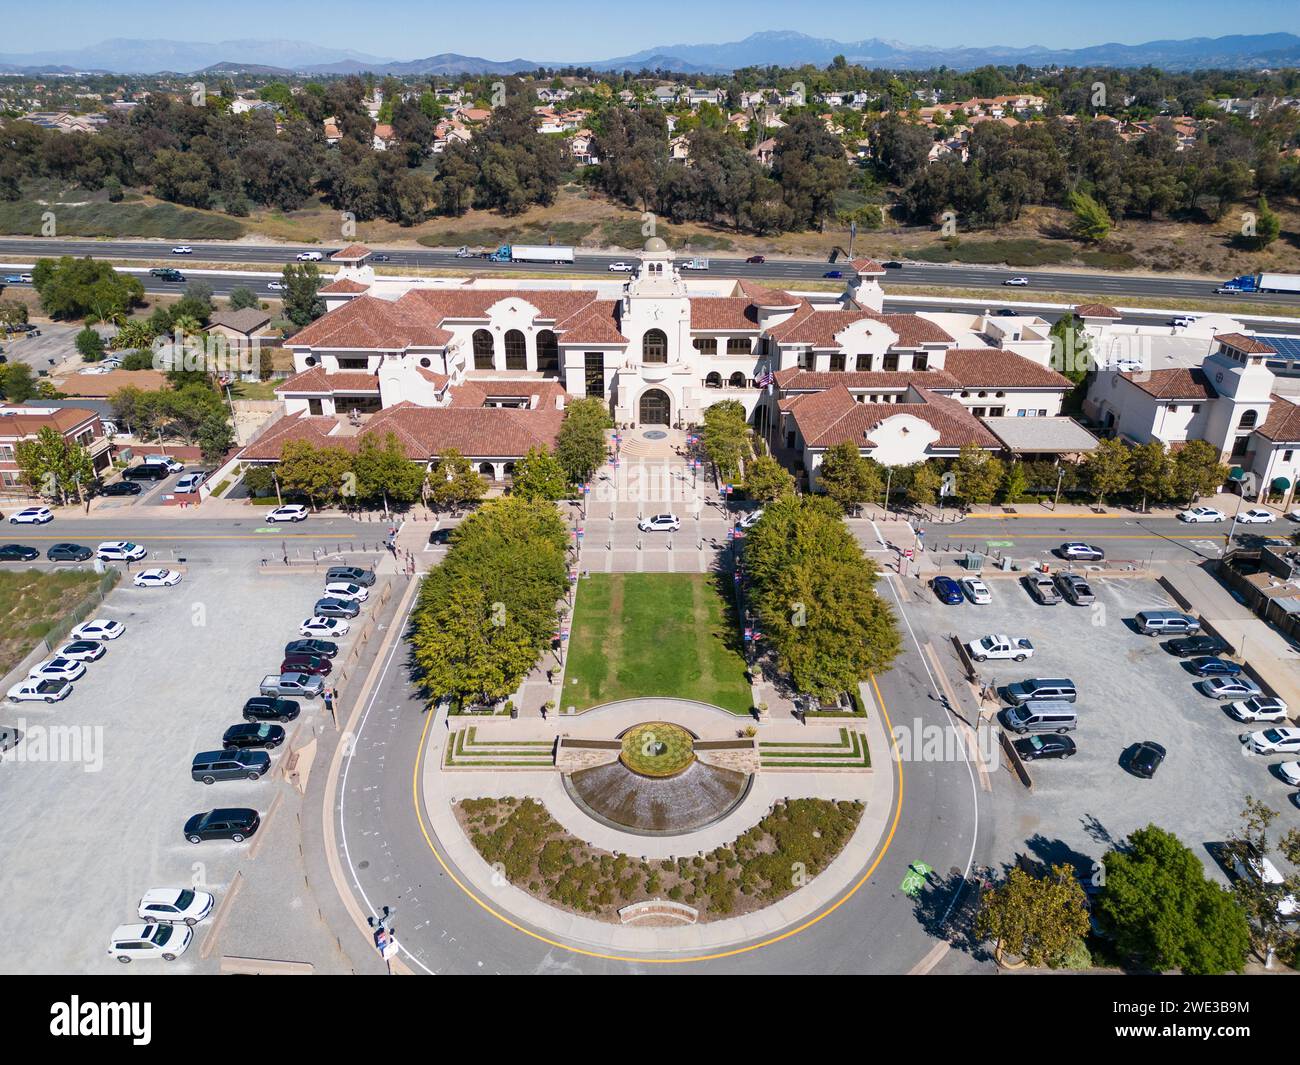 City of Temecula Civic Center, Old Town Temecula, CA, USA Foto Stock